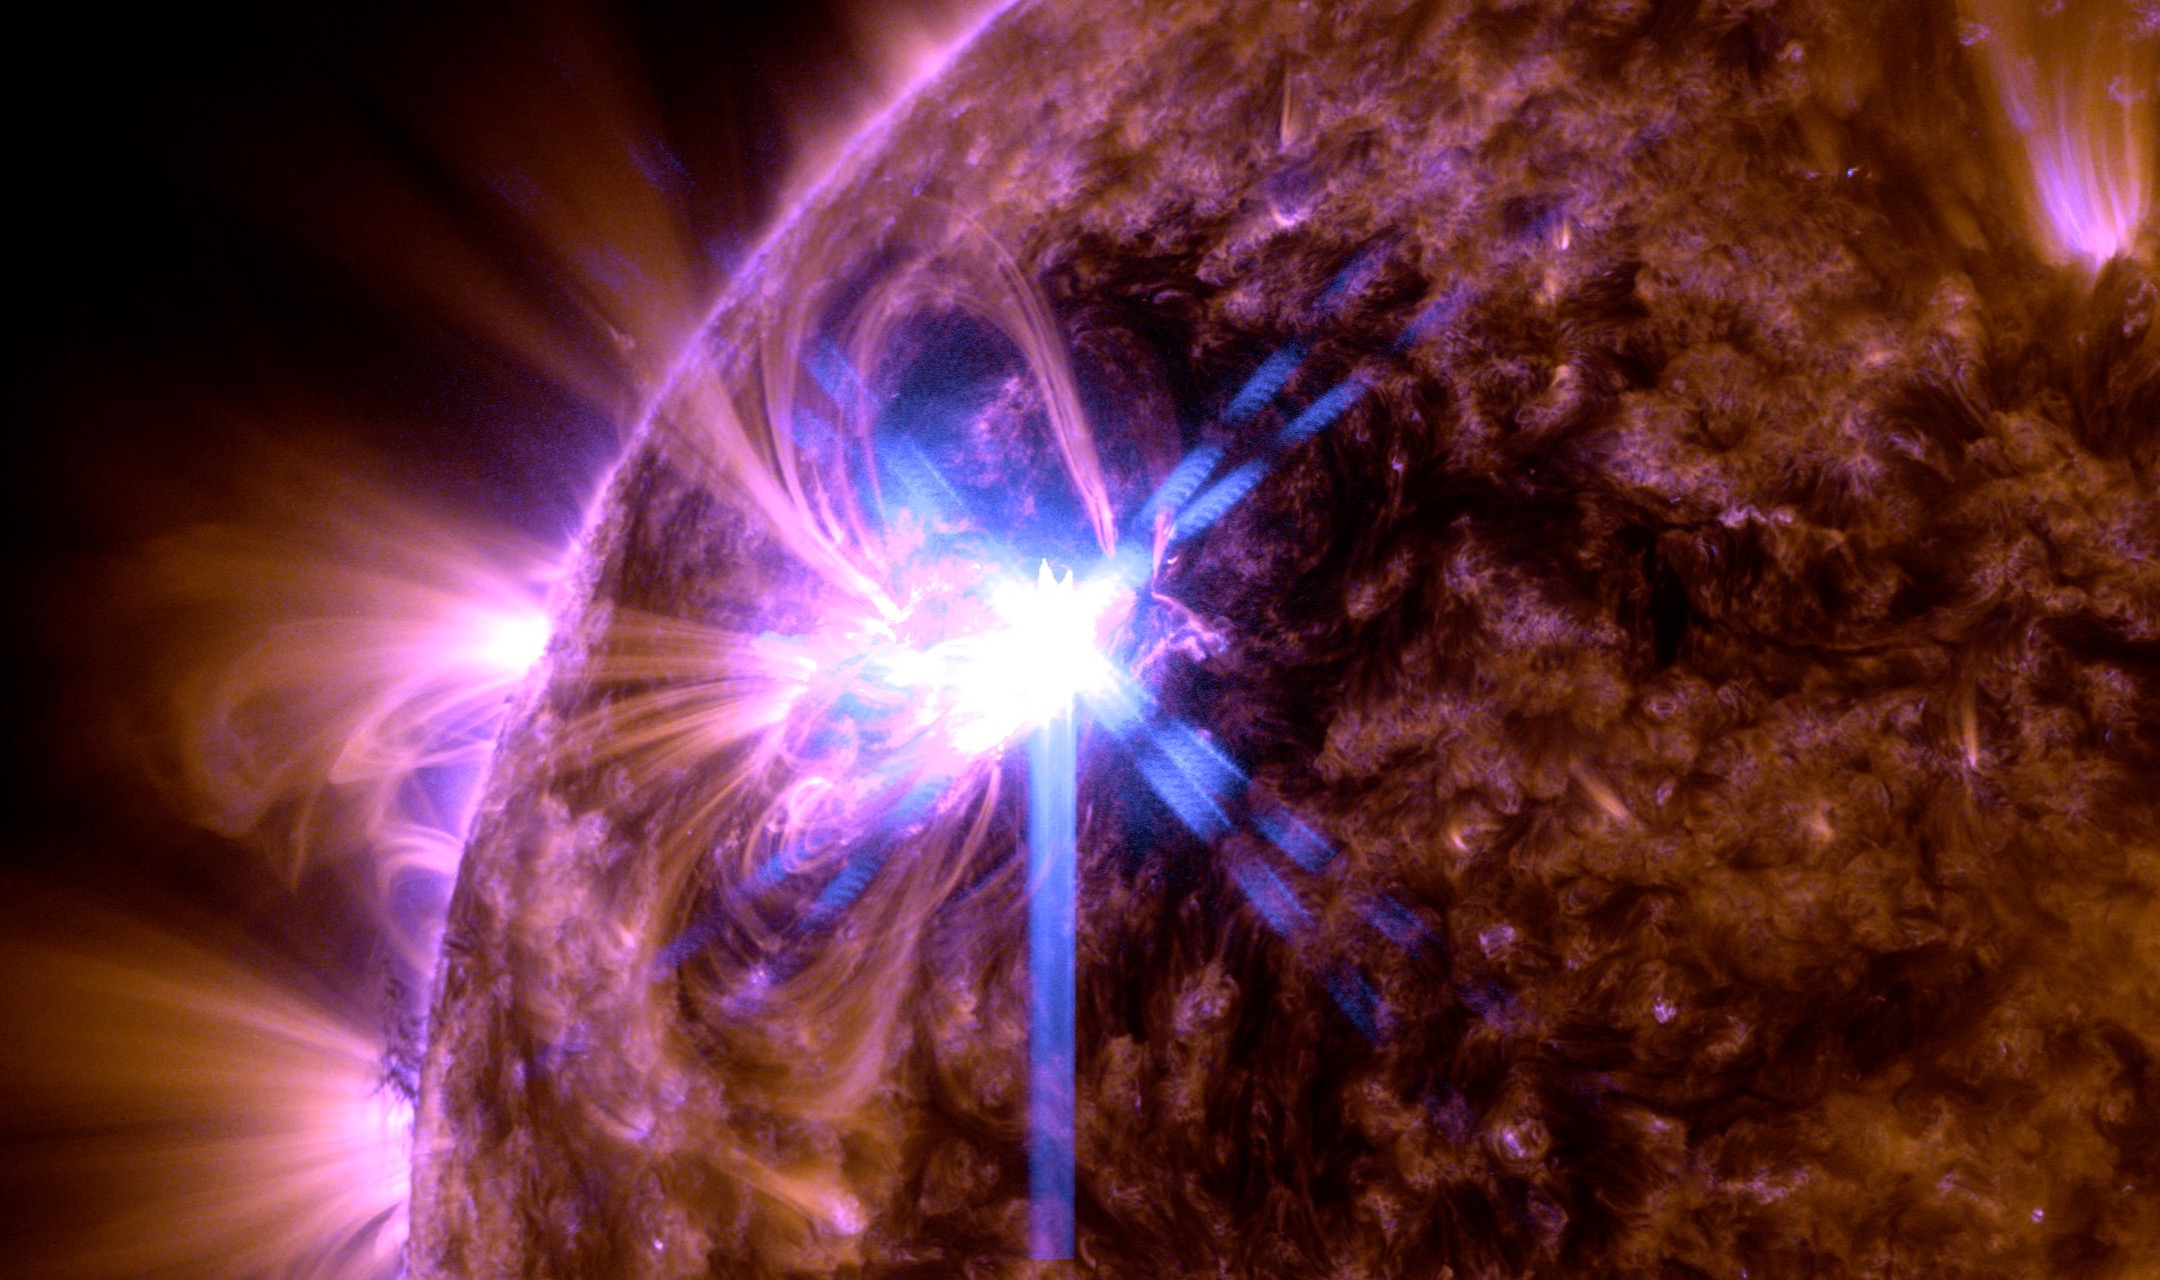 NASA’s Solar Dynamics Observatory captured this image of a solar flare – as seen in the bright flash on theupper left – on Feb. 21, 2024. The image shows a blend of 171 Angstrom and 131 Angstrom light, subsets of extreme ultraviolet light that highlight the plasma loops in the corona and the extremely hot material in flares, respectively. Cropped to highlight the flaring region. Credit: NASA/SDO